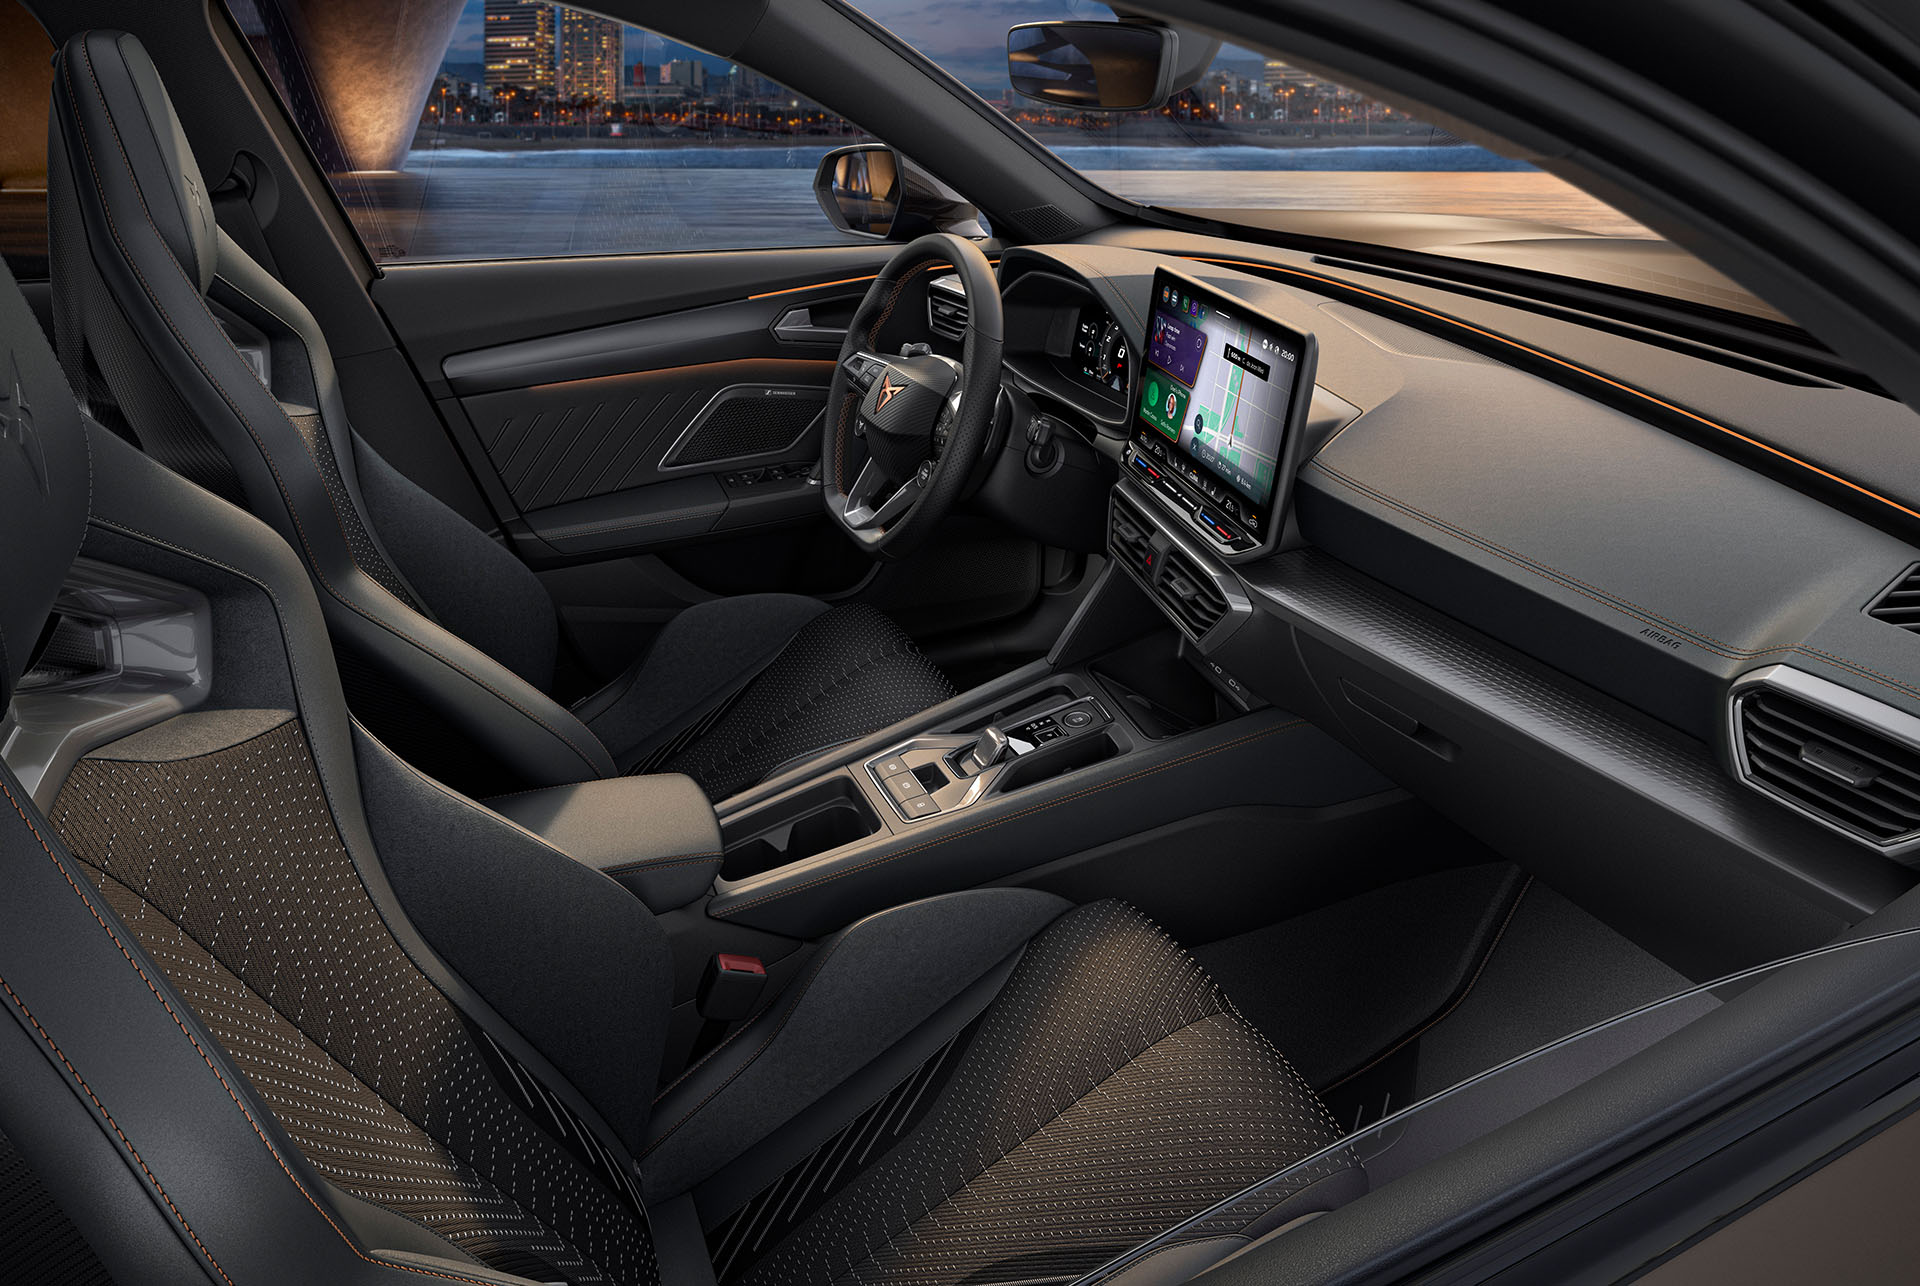 Interior view of a new CUPRA Formentor 2024 interior with sporty seats, detailed stitching, a multifunctional steering wheel, large infotainment screens and a sleek dashboard design. The car overlooks a cityscape at dusk through the windshield.